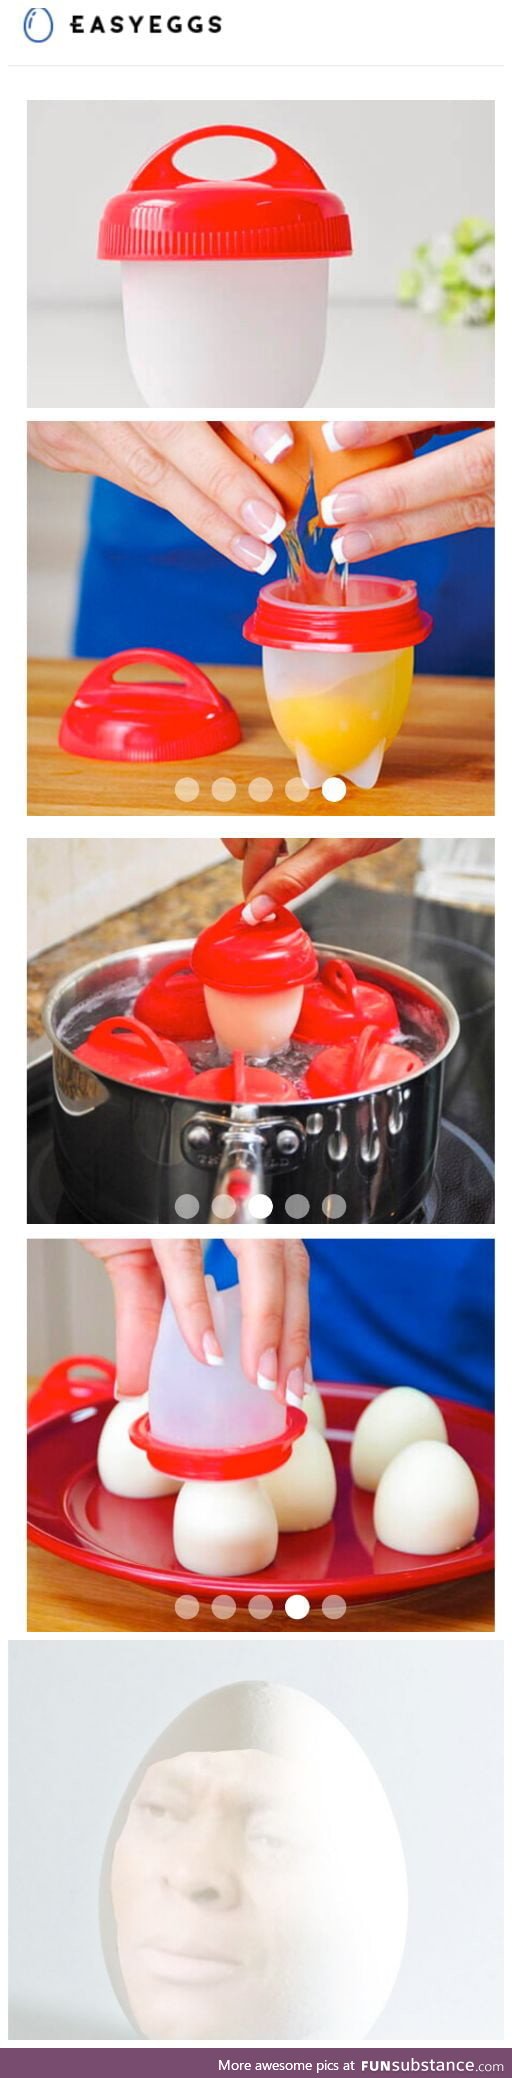 So ... They invented an Egg Boiling Shell to boil eggs without a shell. It is made of